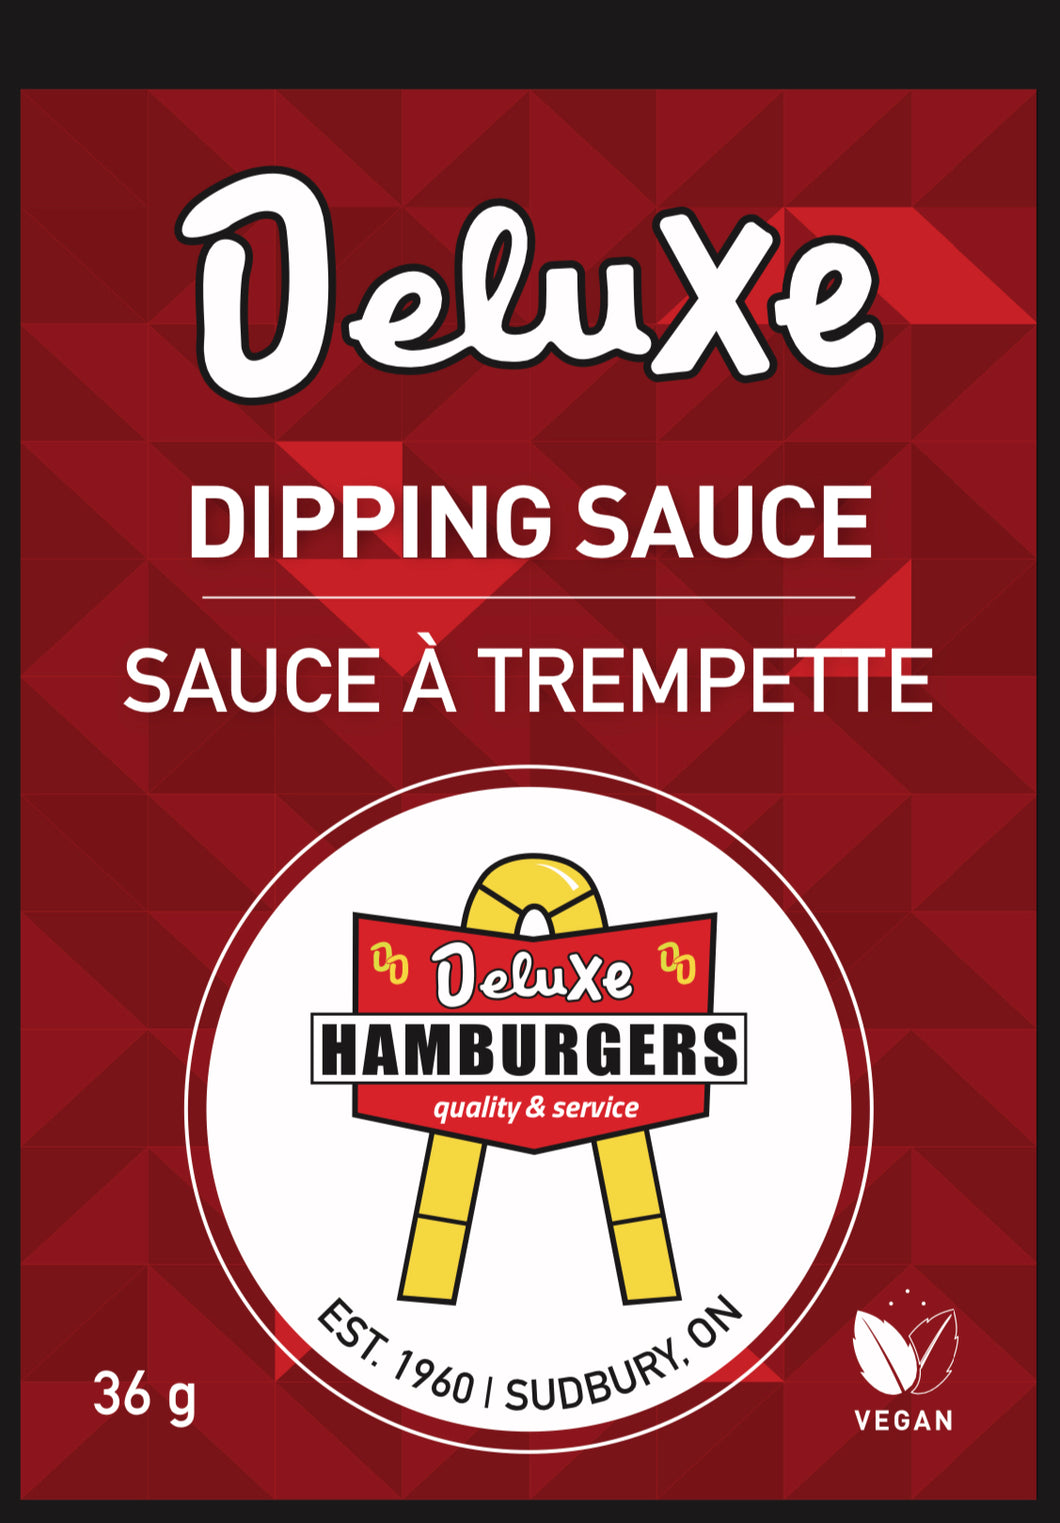 Deluxe dipping sauce